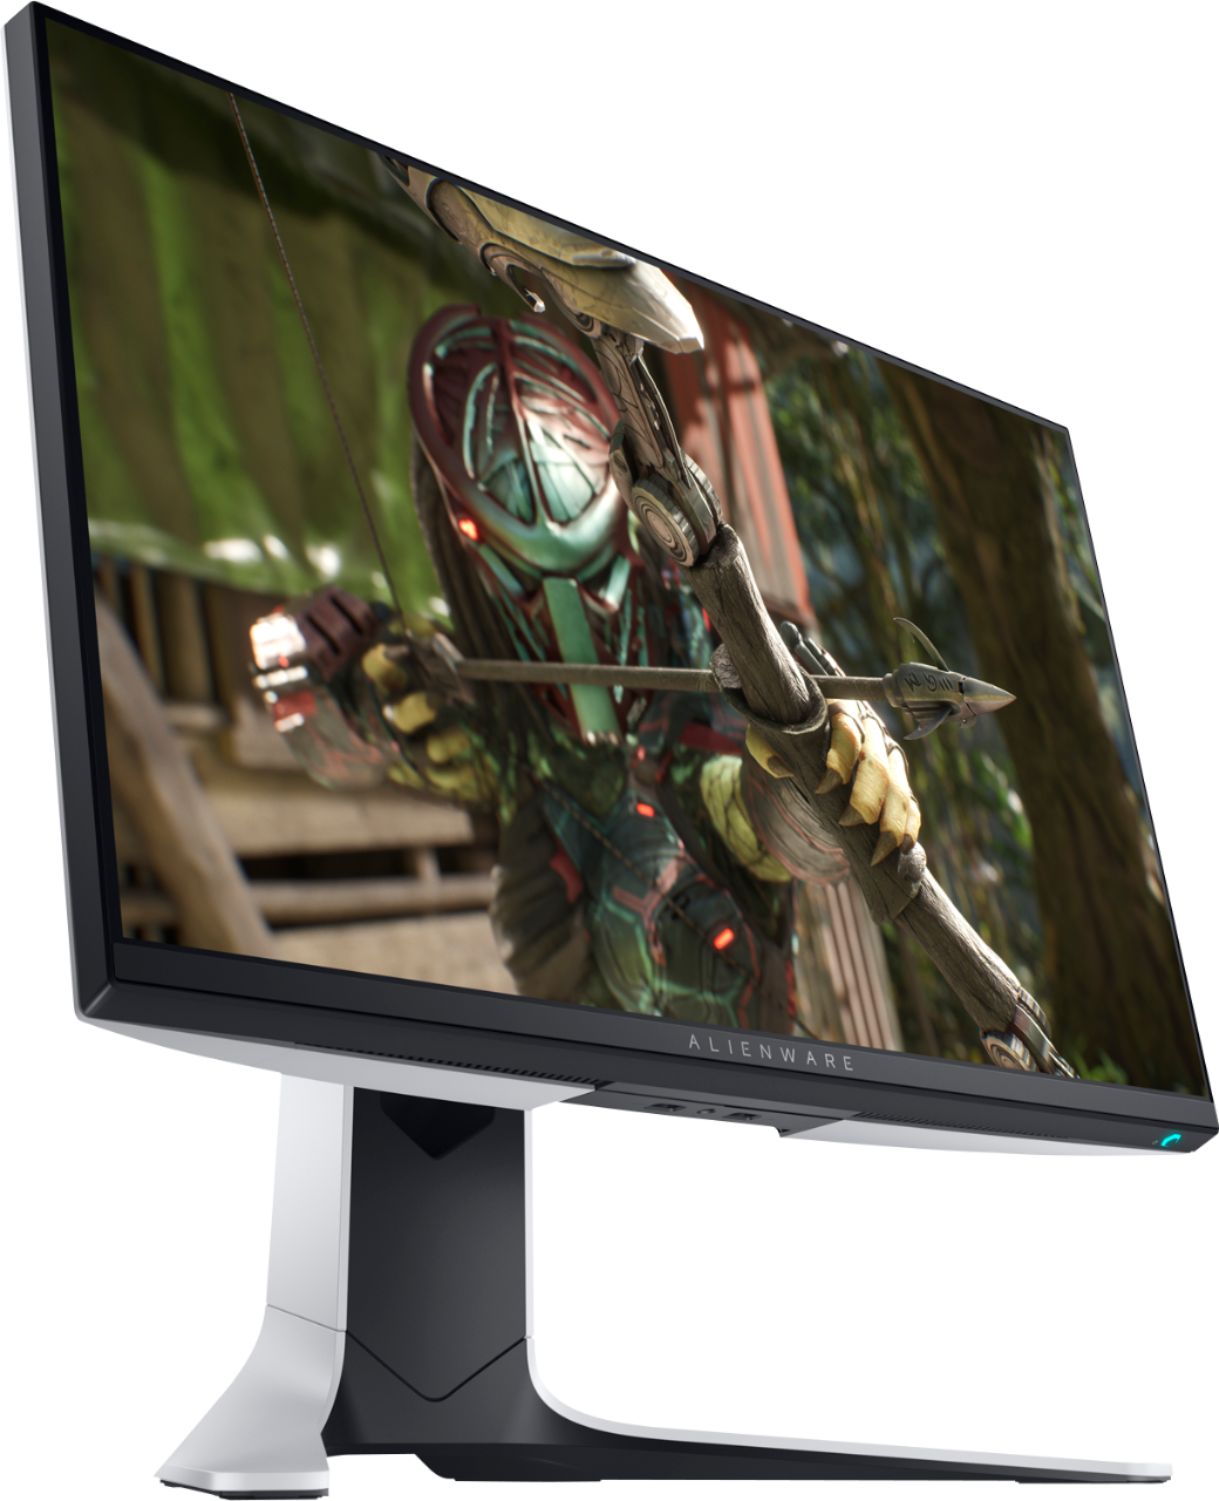 24.5" Alienware 25 AW2521HFL 1920x1080 240Hz Fast IPS, Free-Sync,G-SYNC Monitor $270 at Dell/eBay